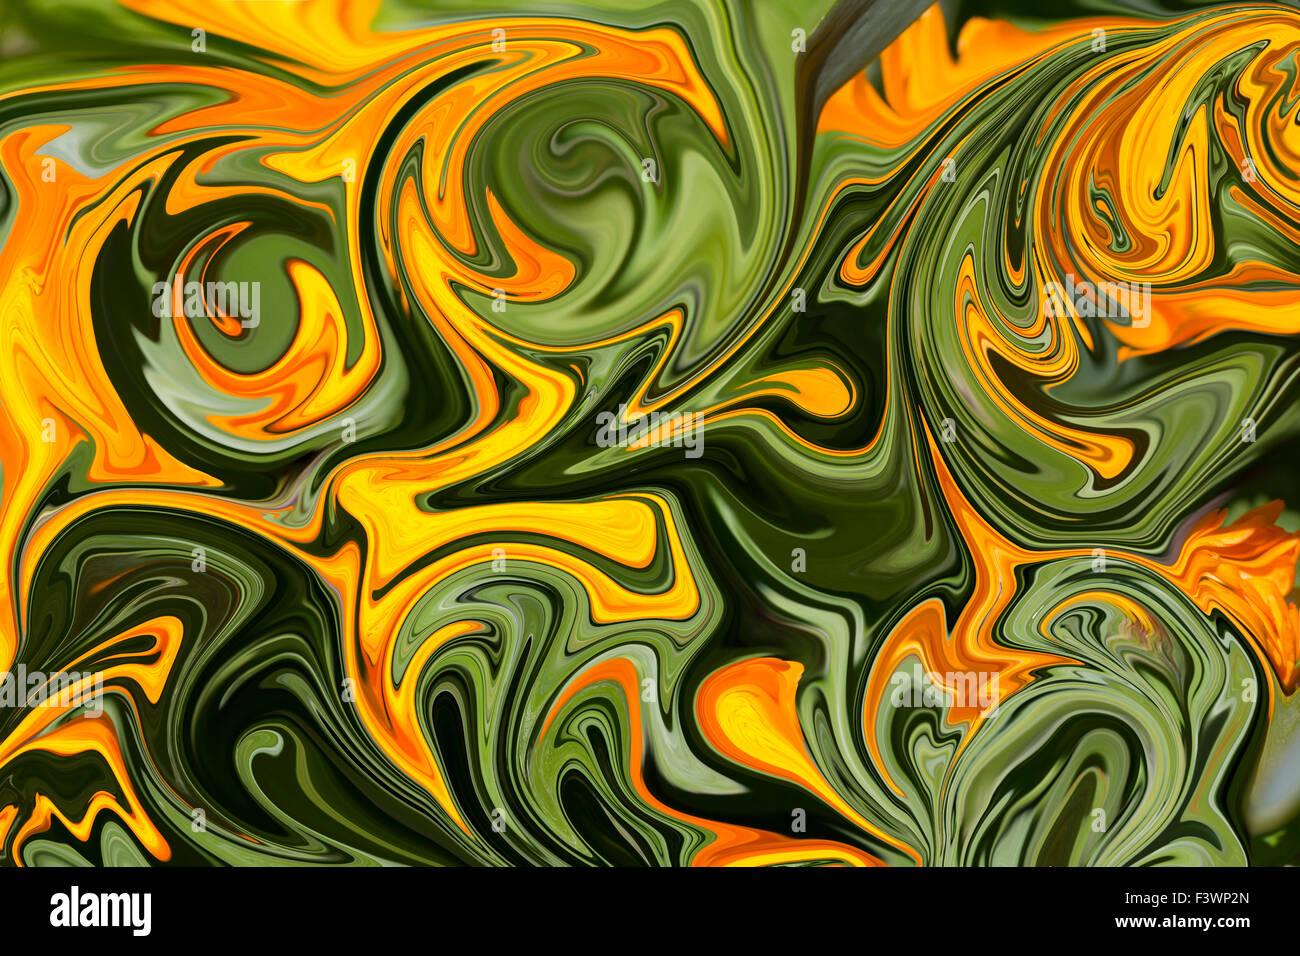 Abstract image based on manipulated images of nature Stock Photo